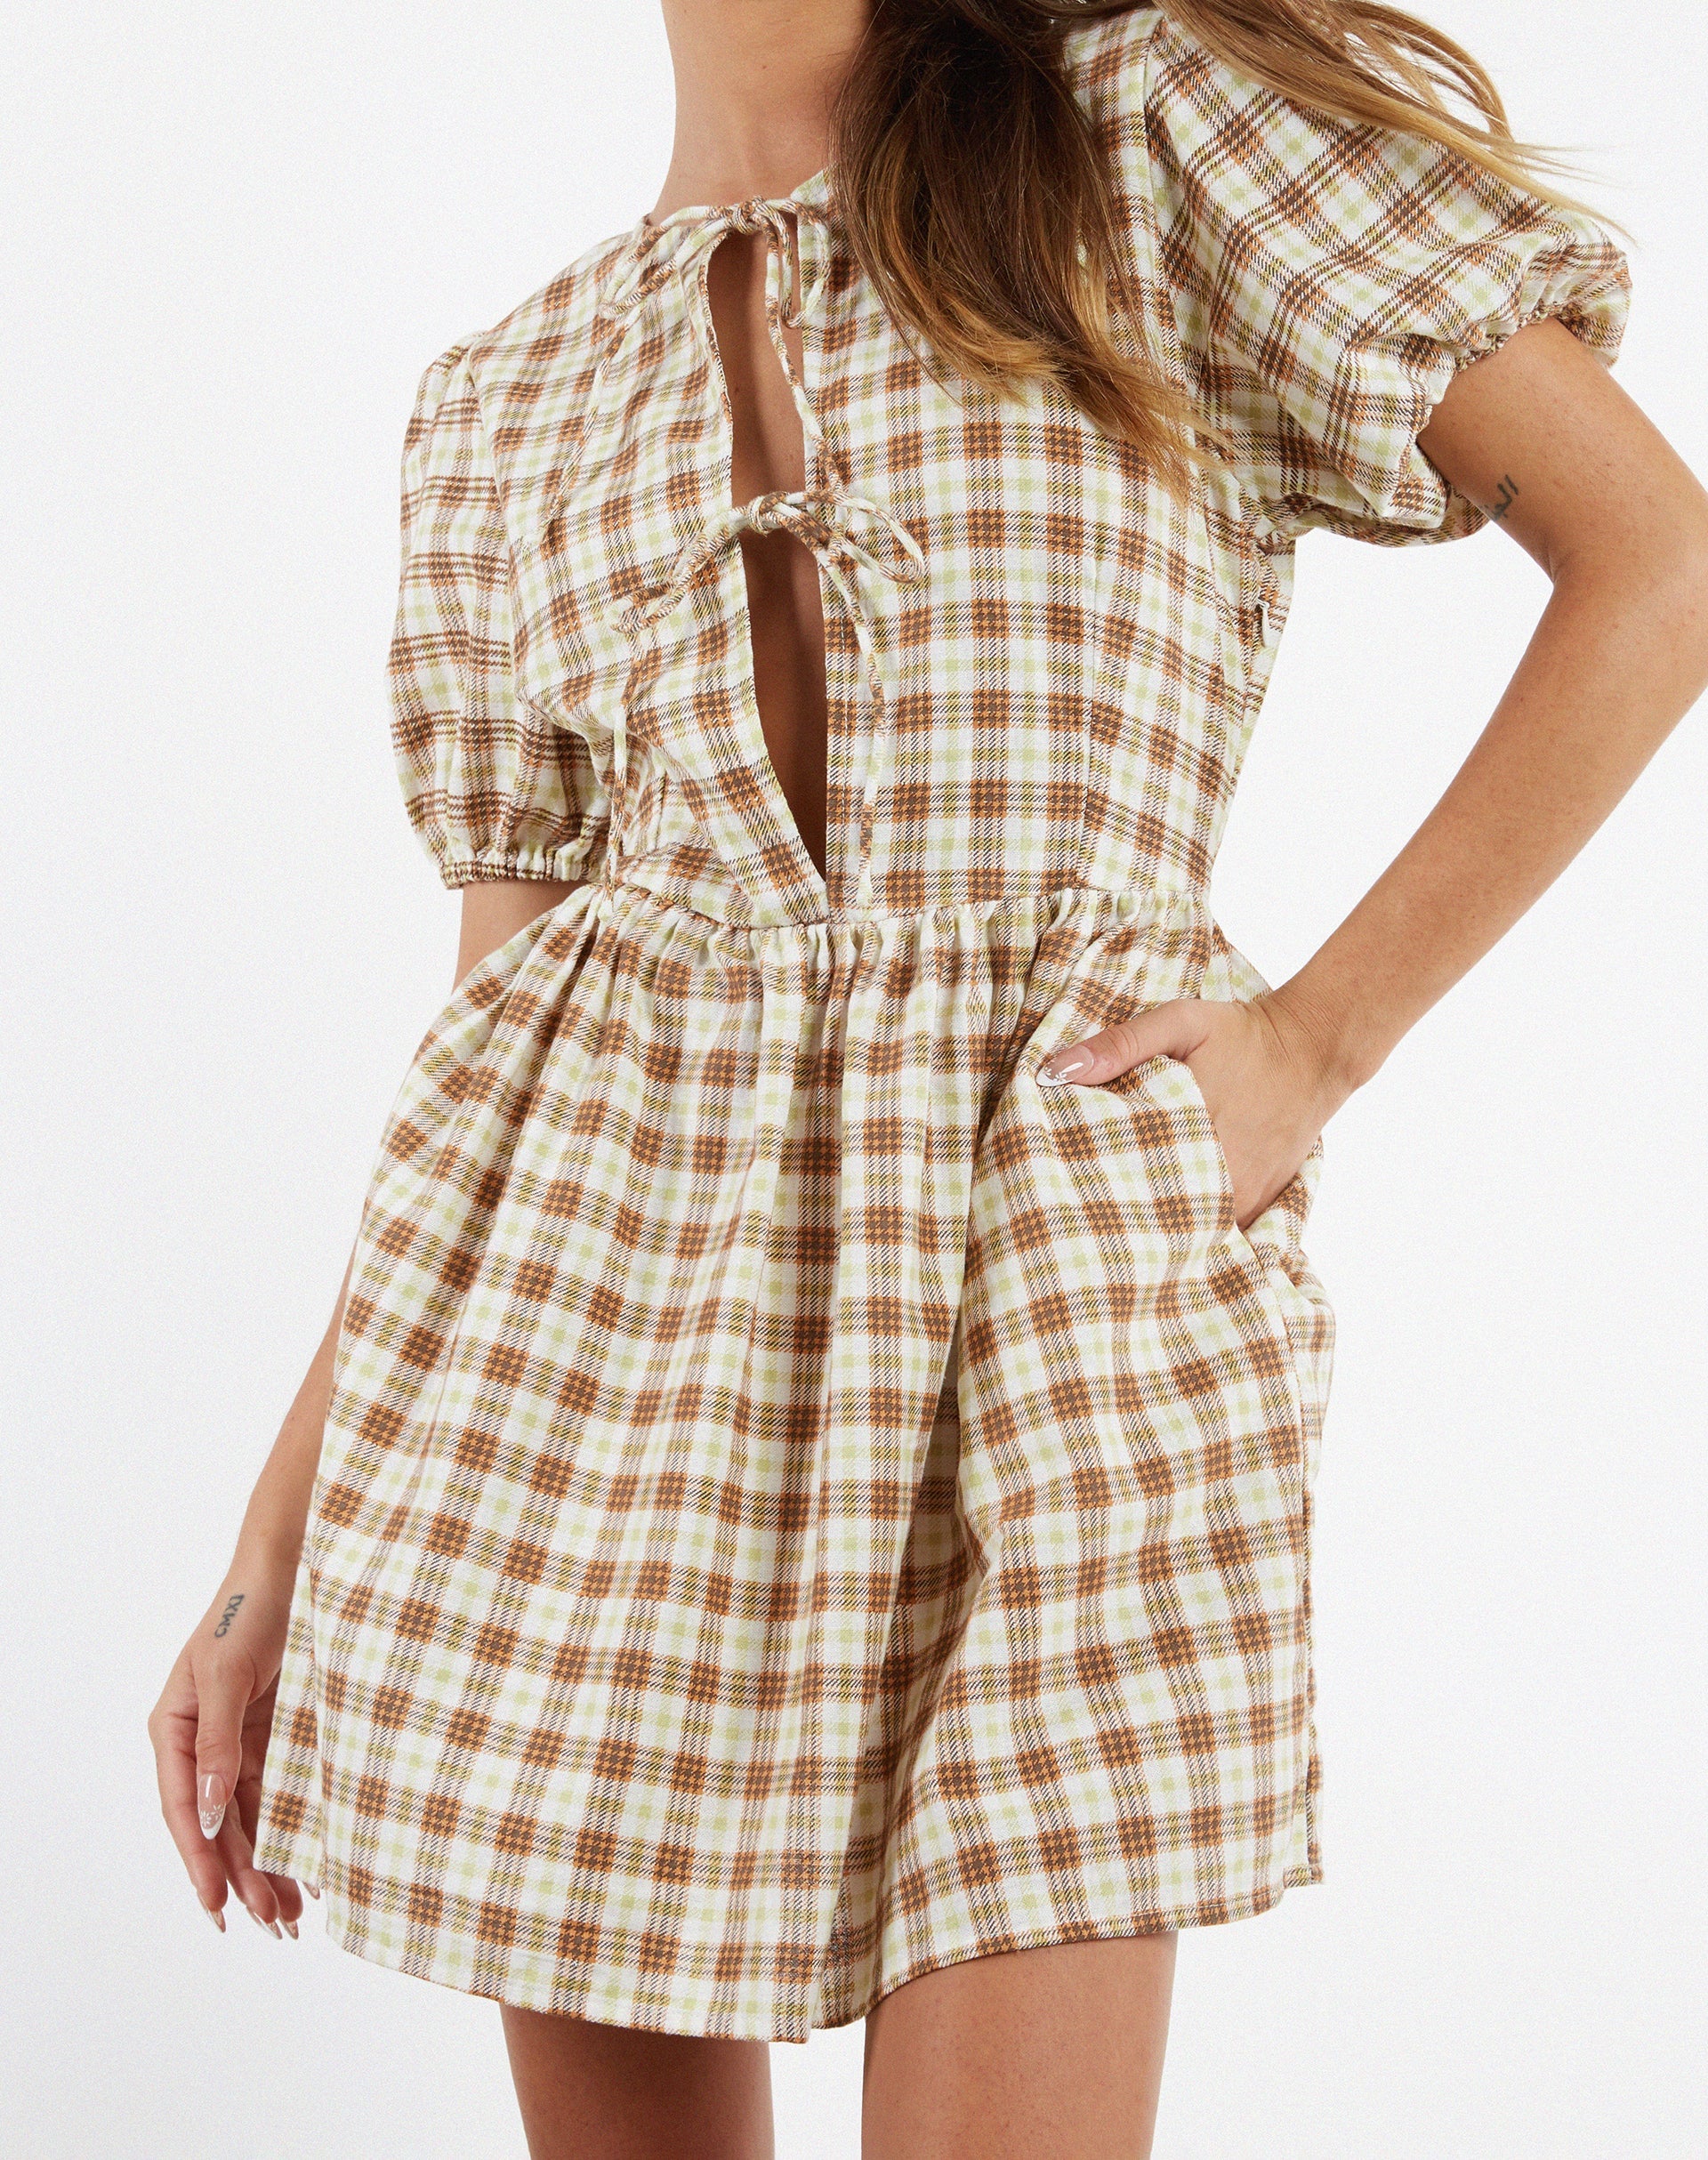 Image of MOTEL X JACQUIE Shirley Mini Dress in Yellow Brown Check